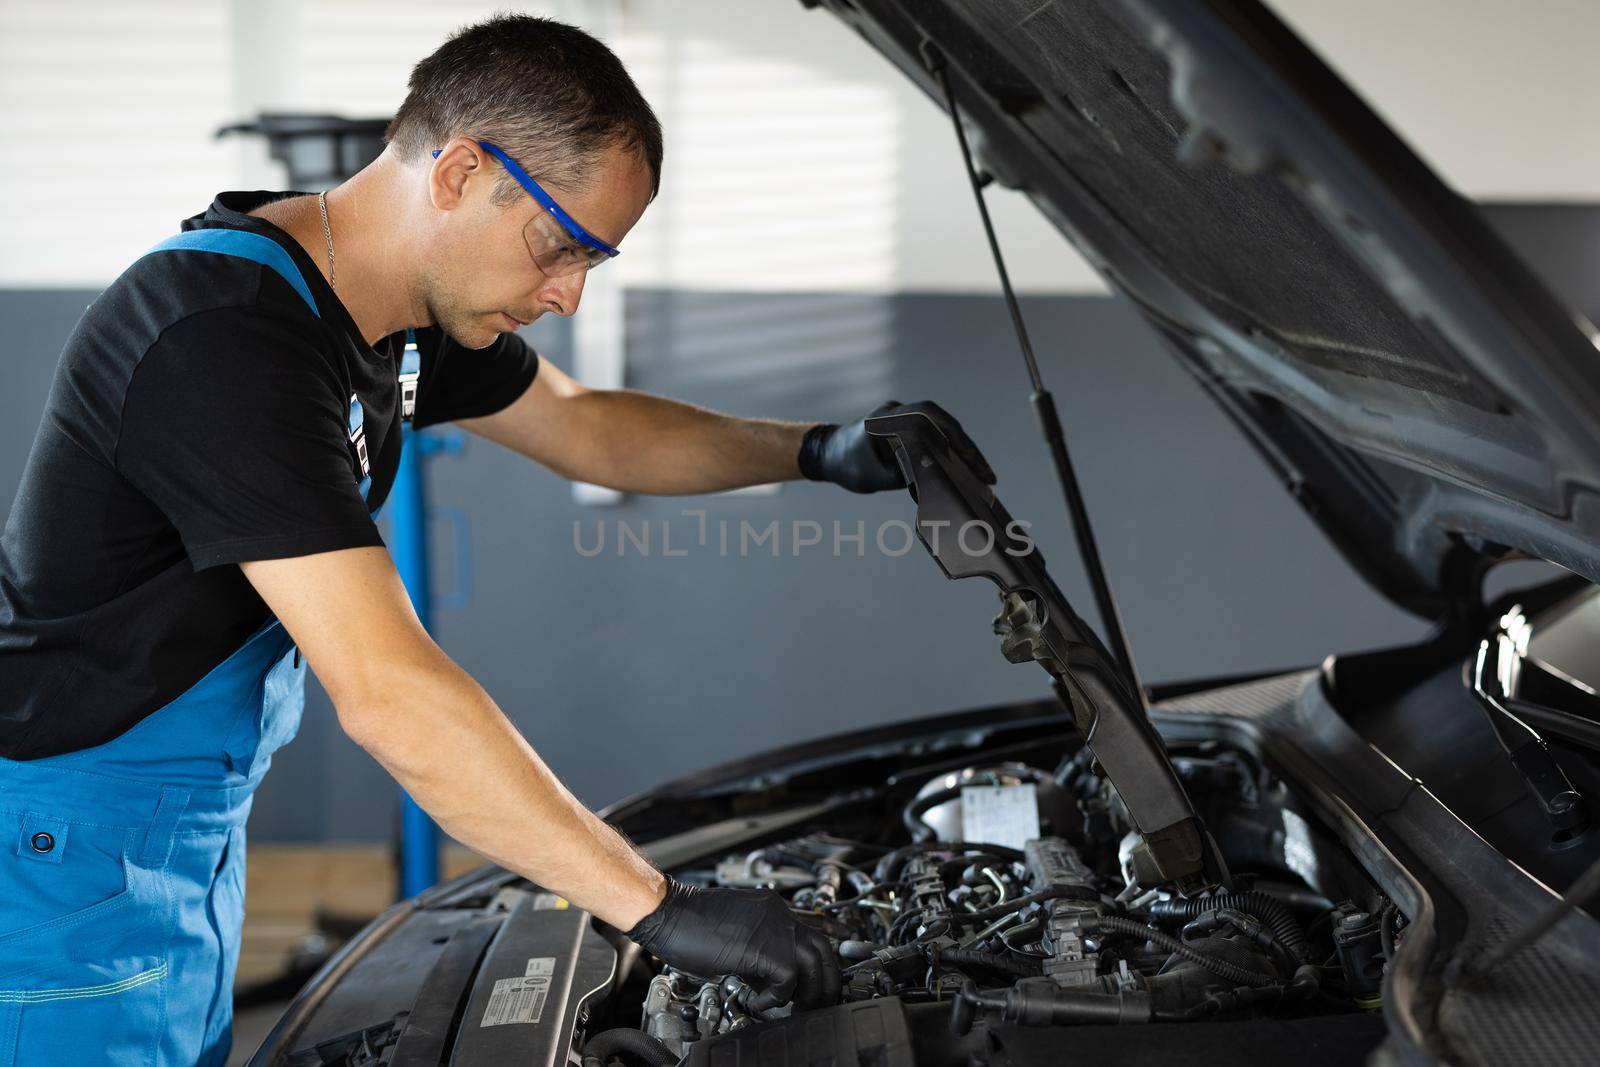 Mechanic man open a car hood and check up the engine. Car mechanic noting repair parts during open car hood engine repair at garage. Overheating of a car engine. Motor with open hood.